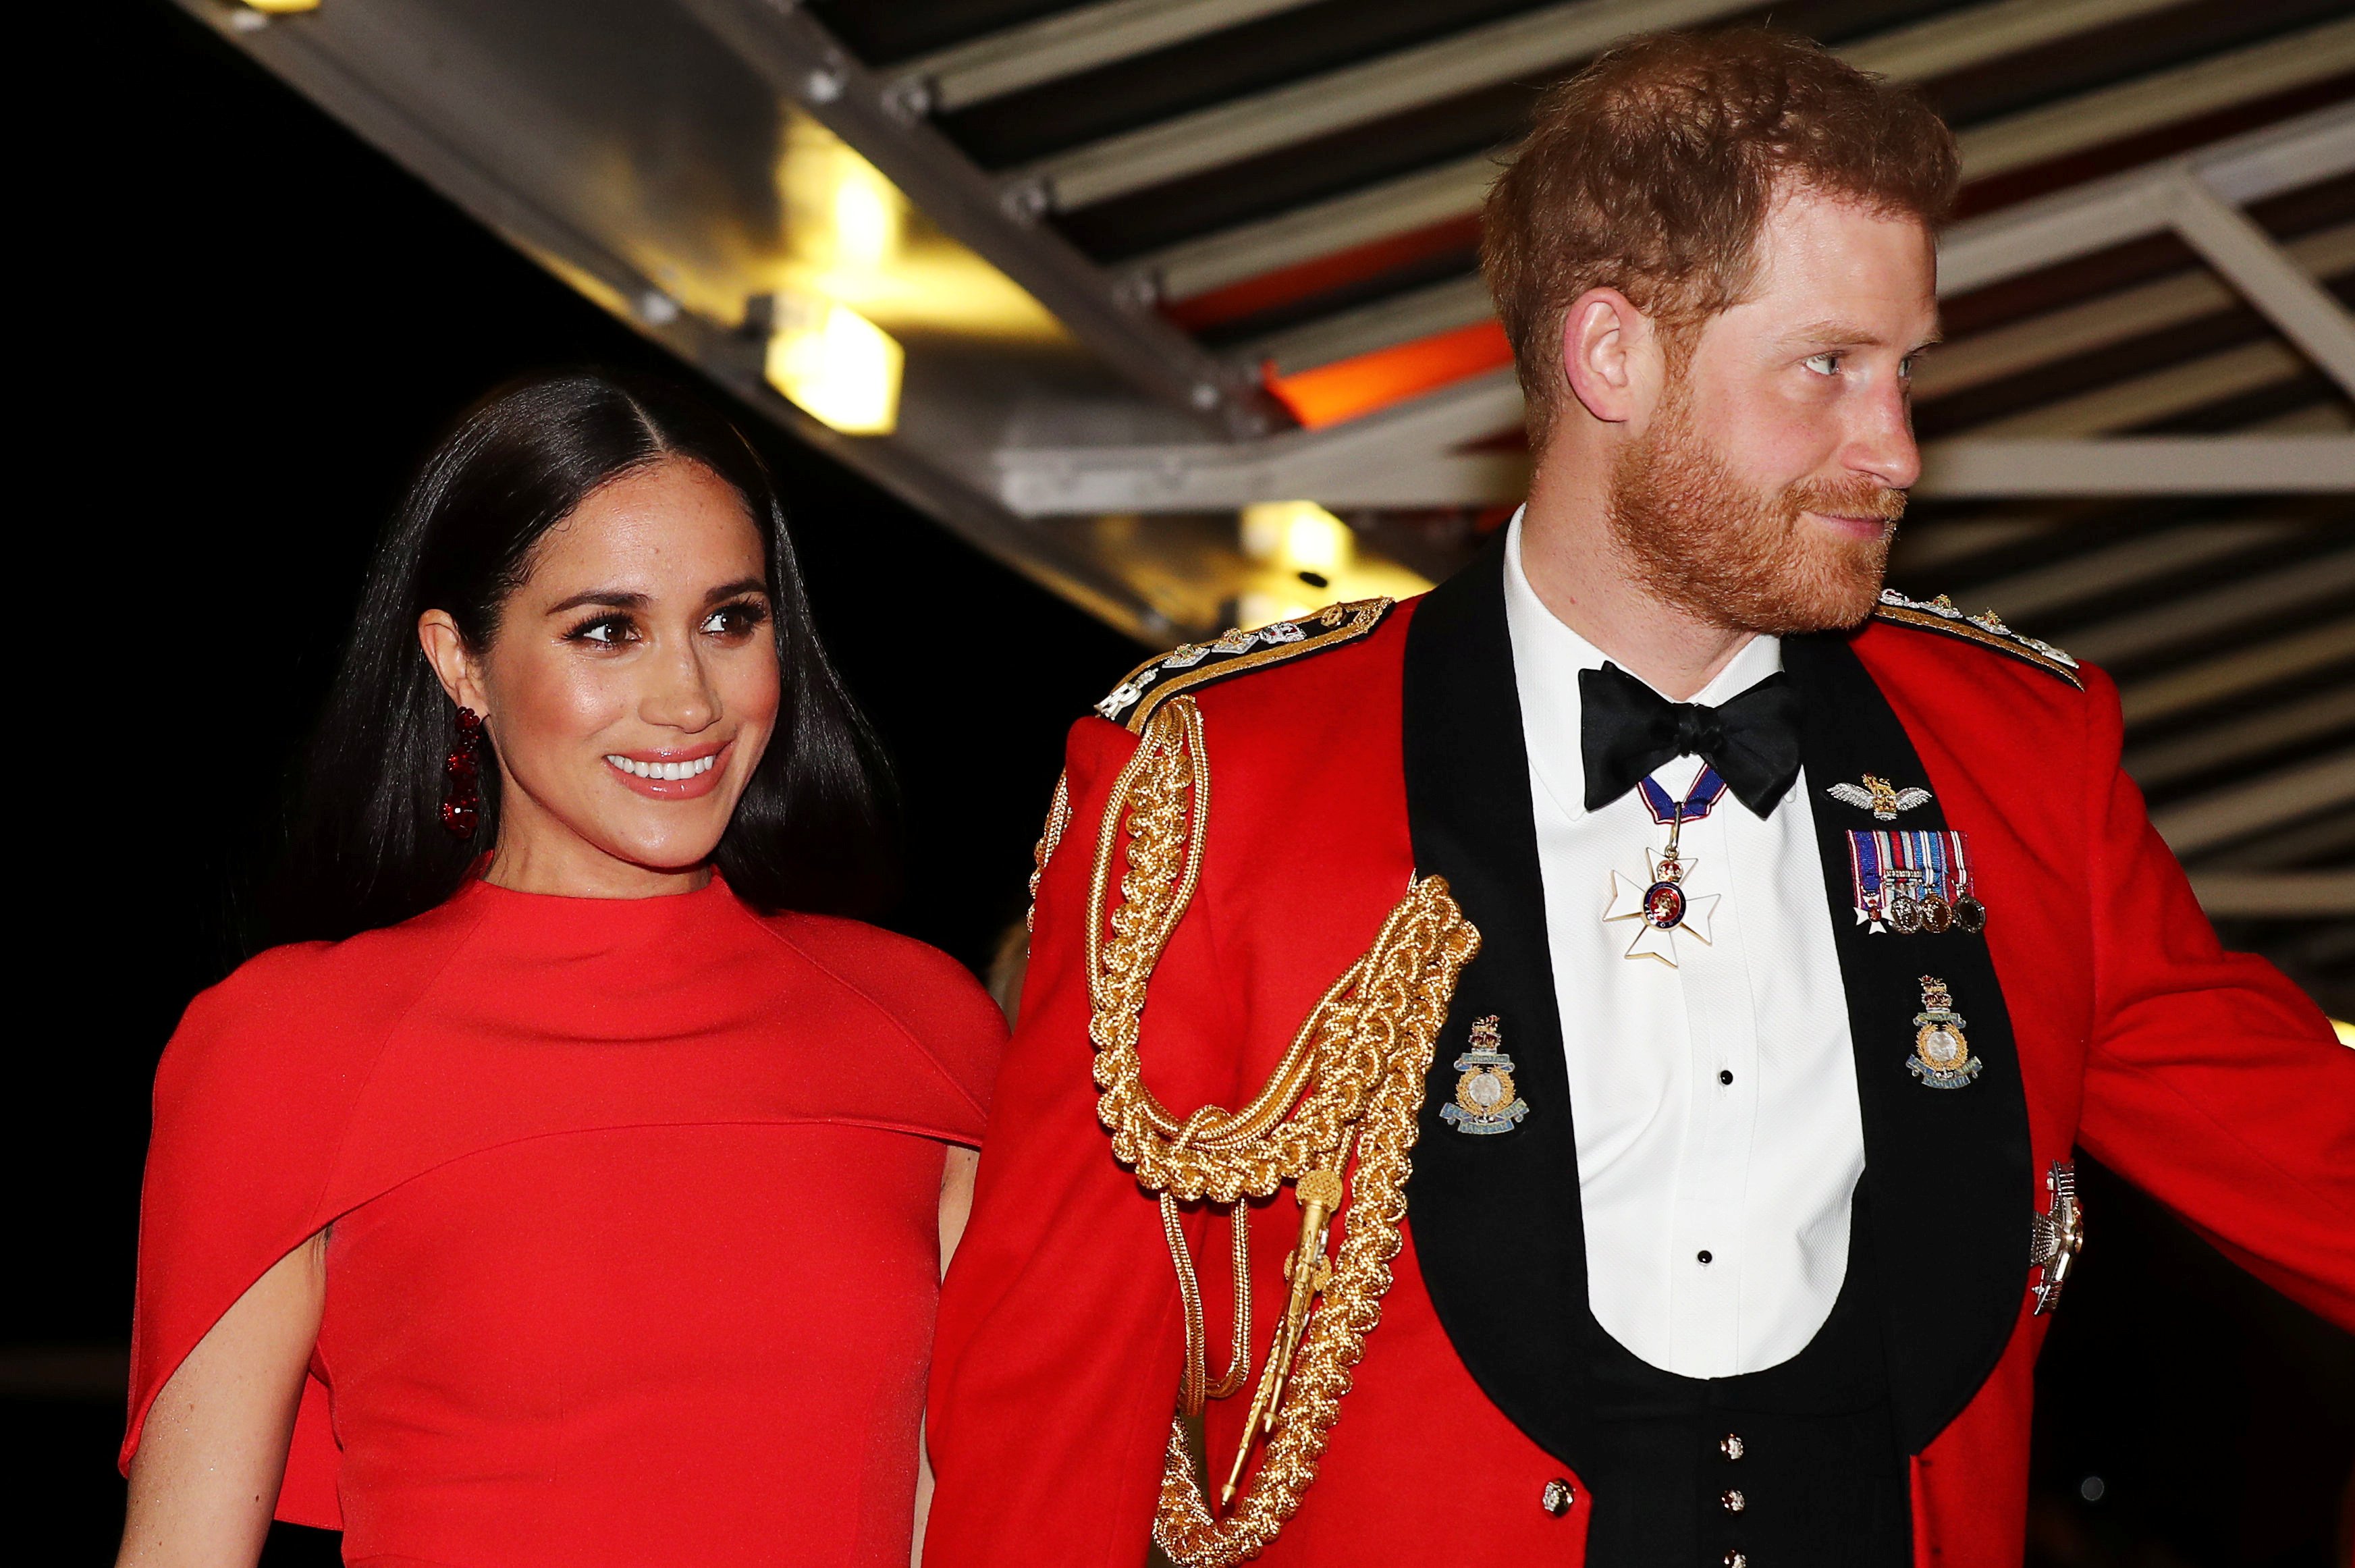 Prince Harry and Meghan Markle arriving to attend the Mountbatten Music Festival at Royal Albert Hall